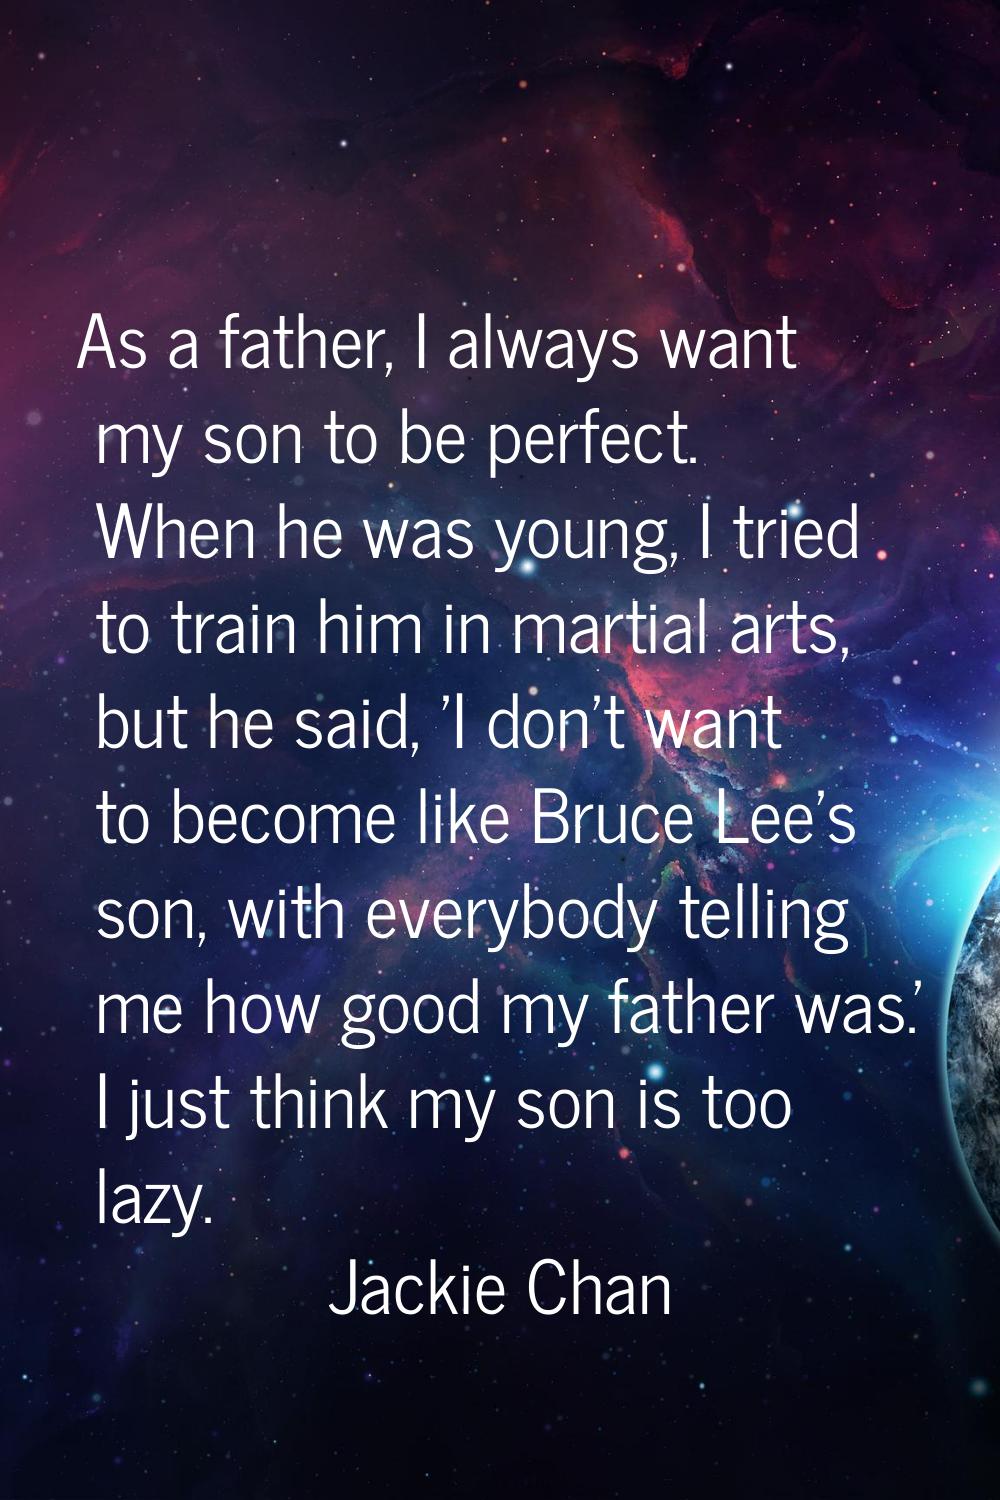 As a father, I always want my son to be perfect. When he was young, I tried to train him in martial